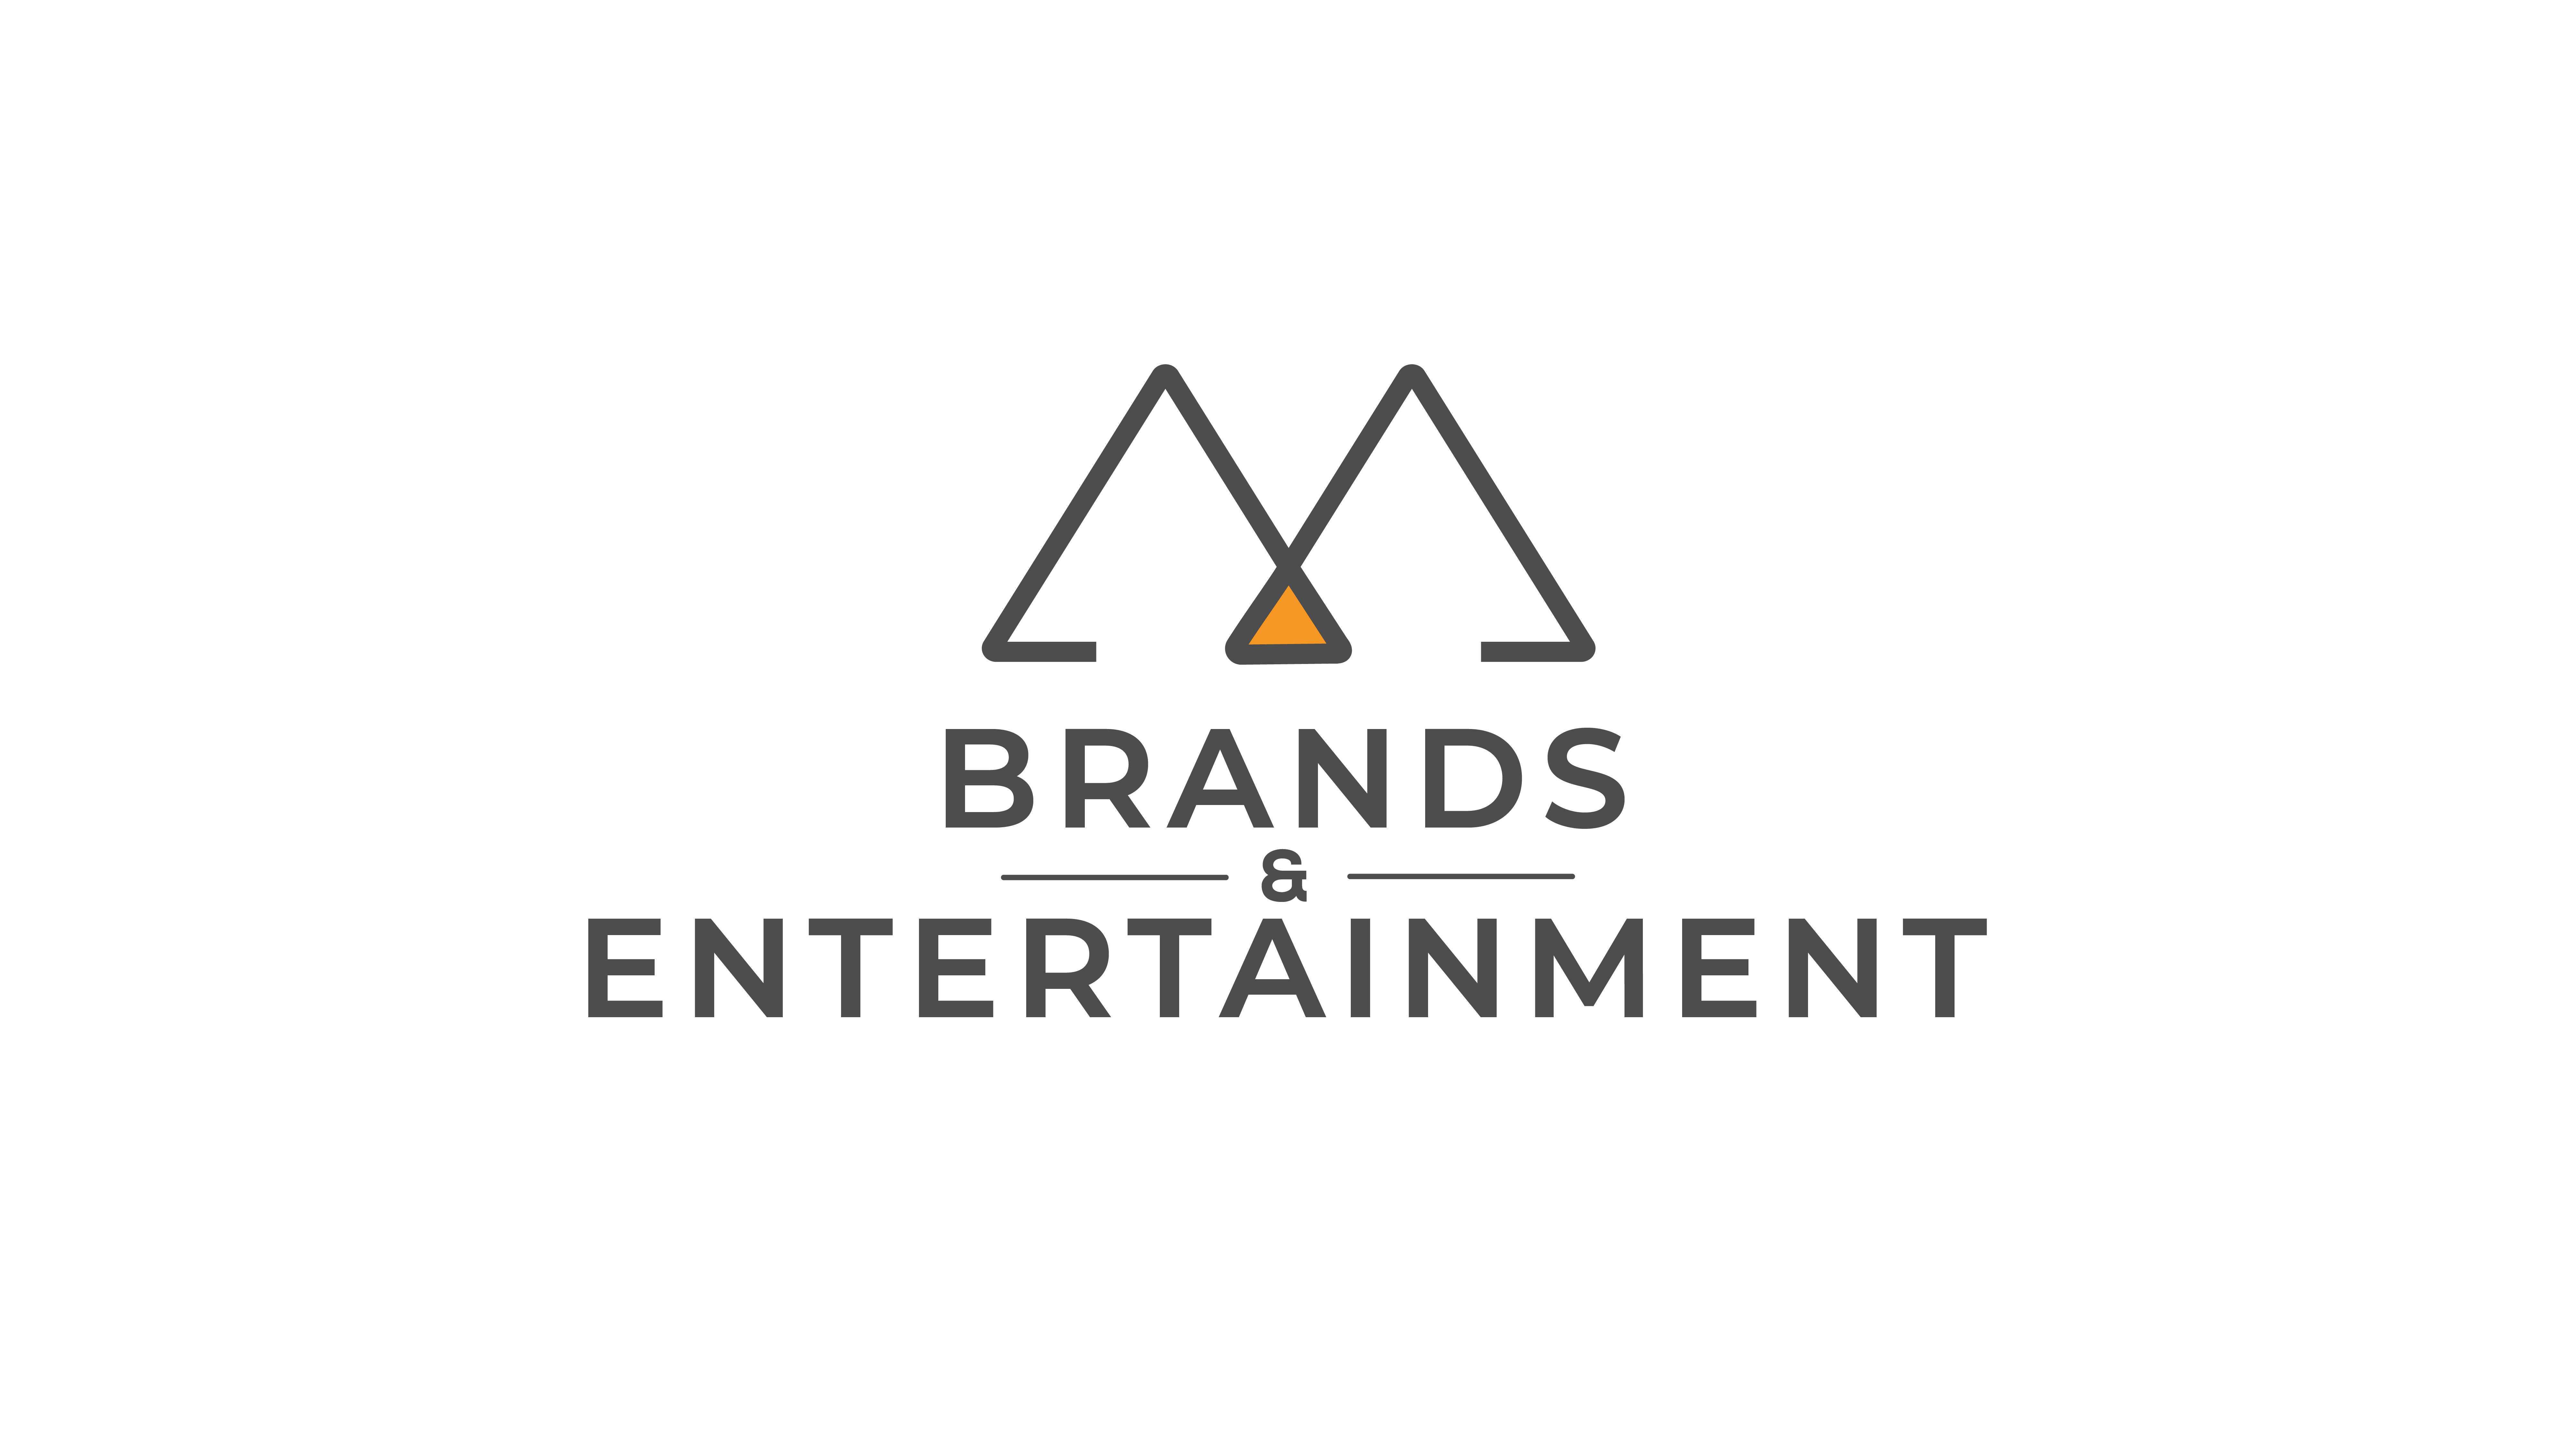 Brand’s and Entertainment